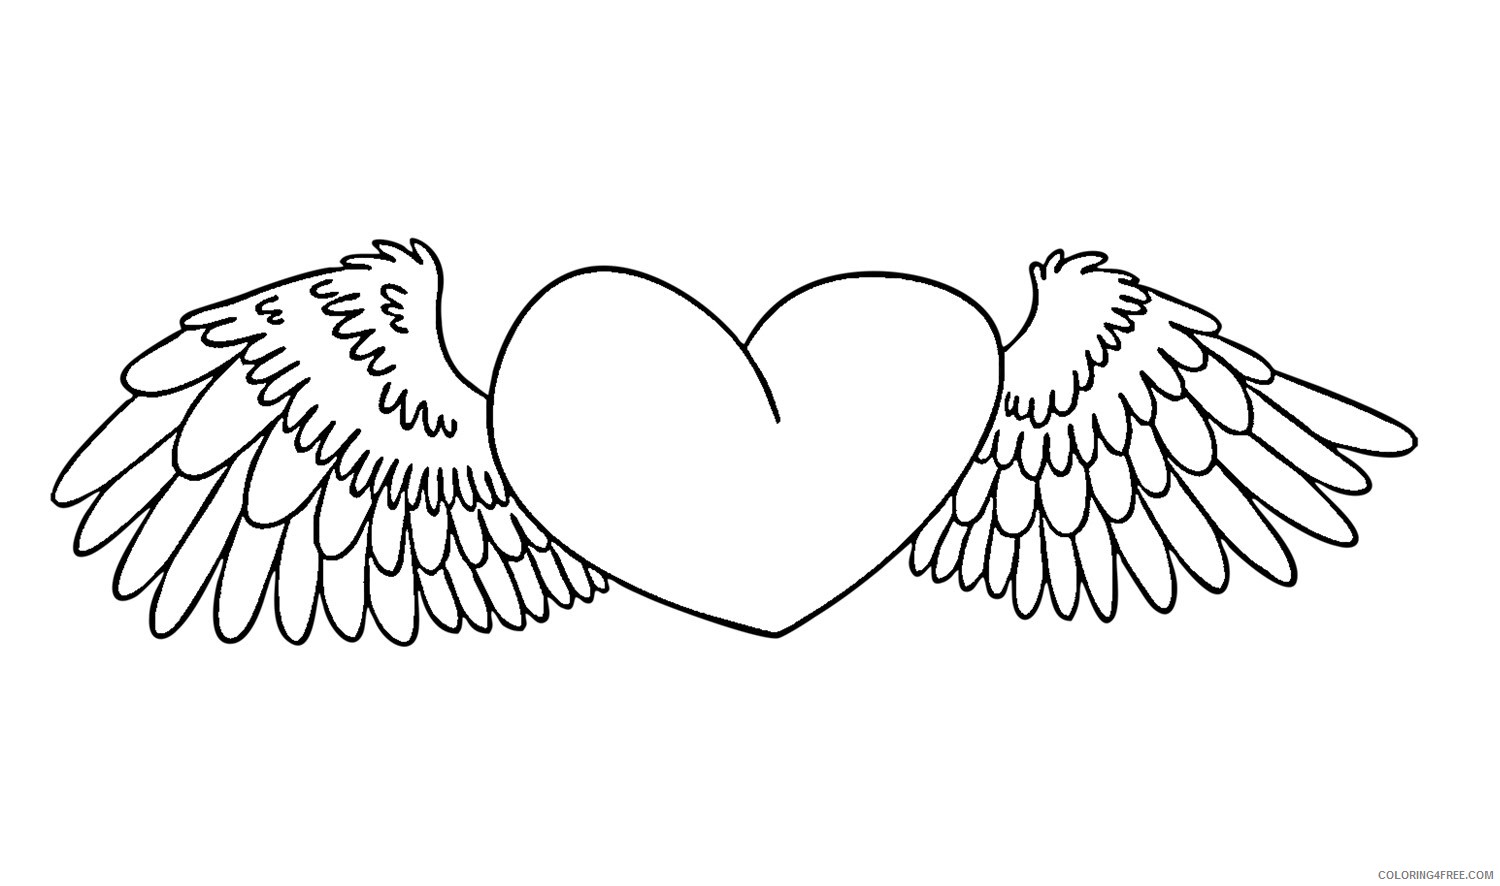 heart coloring pages with wings Coloring4free - Coloring4Free.com